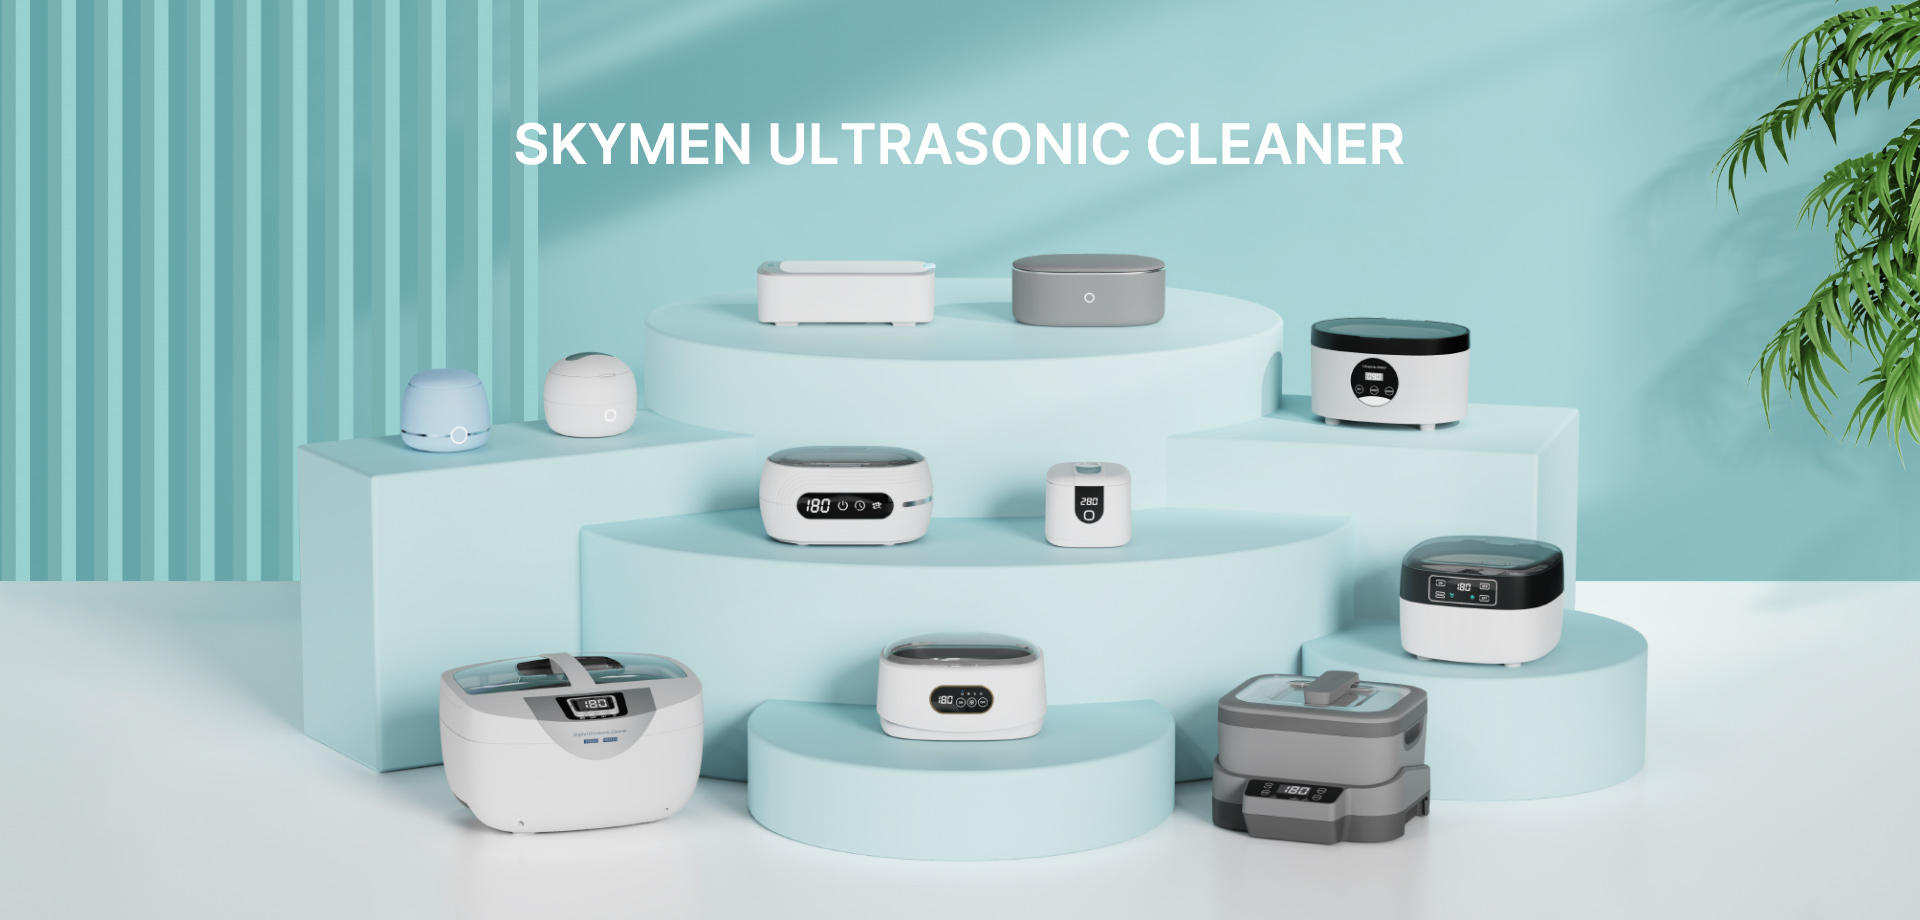 skymen-ultrasonic-cleaner-products-display-banner